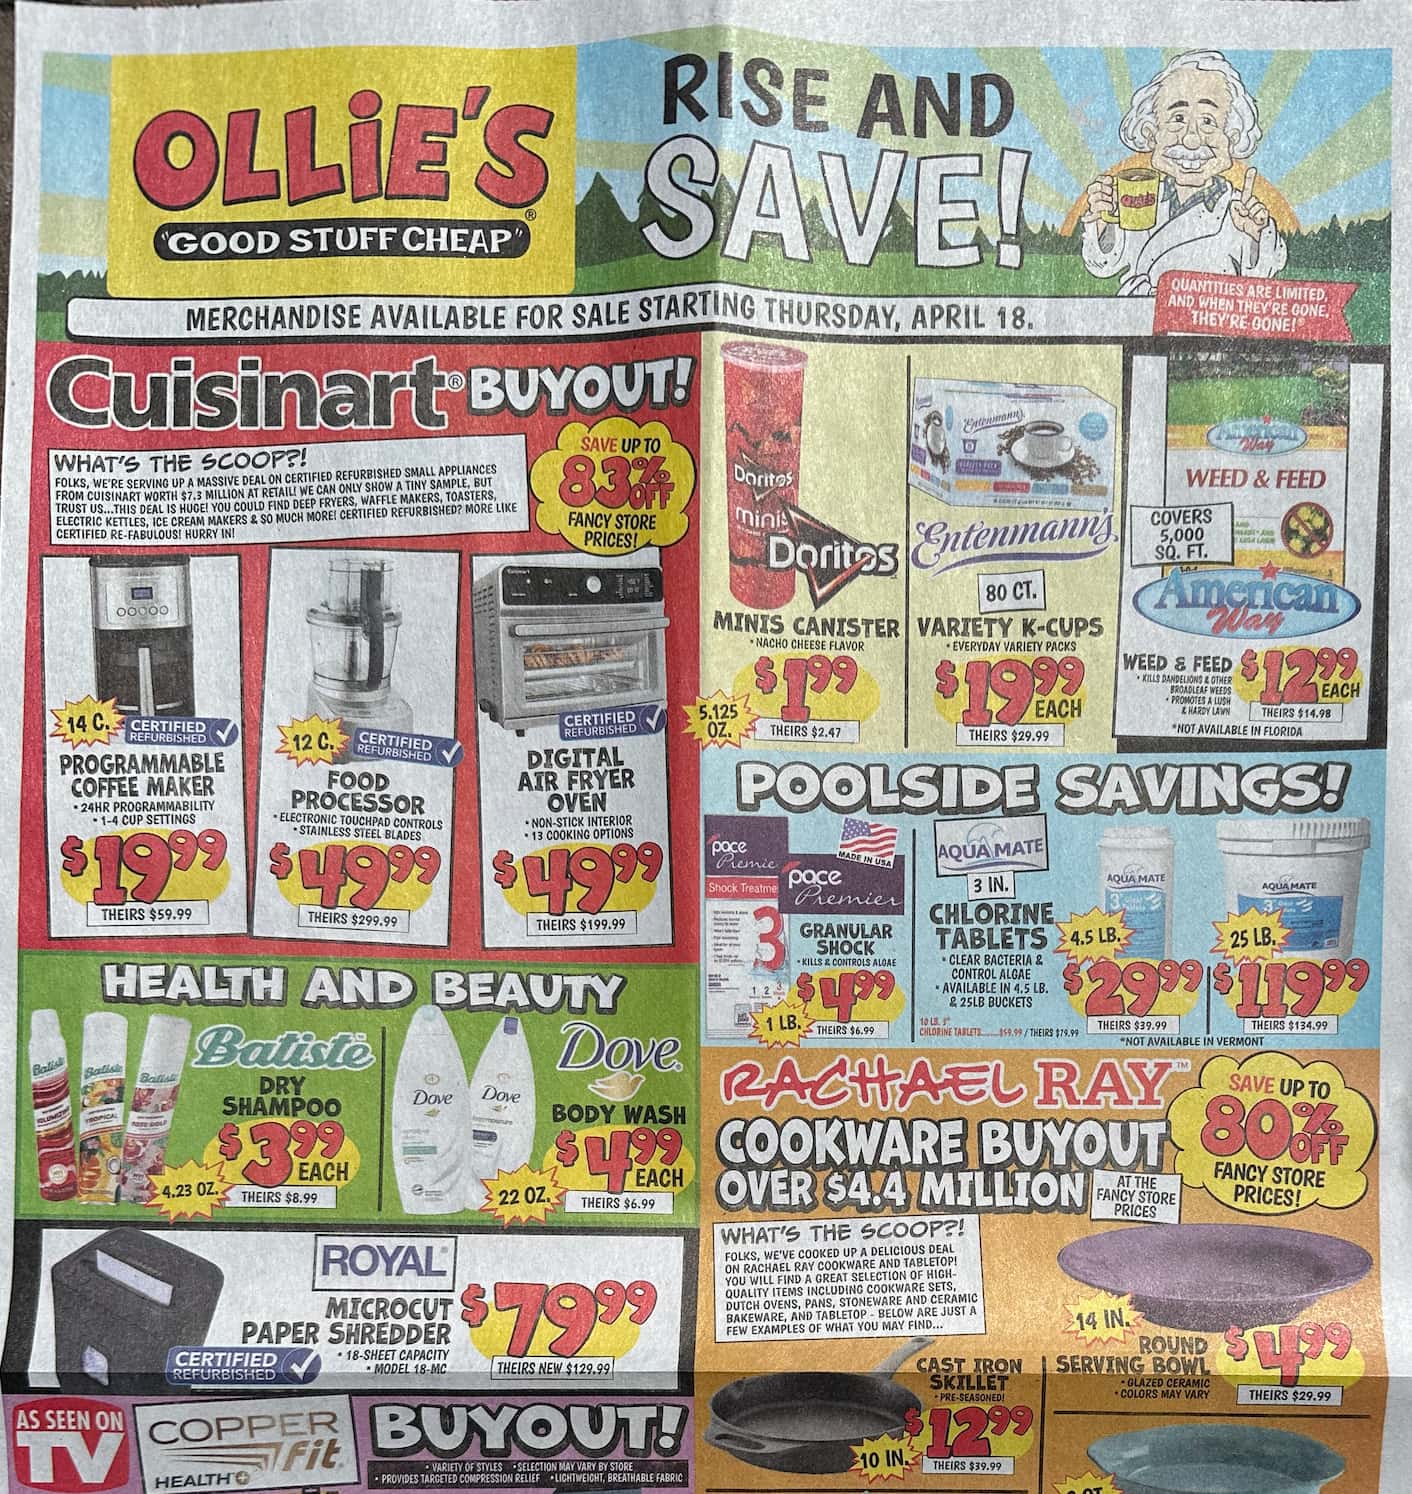 Ollies_weekly_ad_041824_01